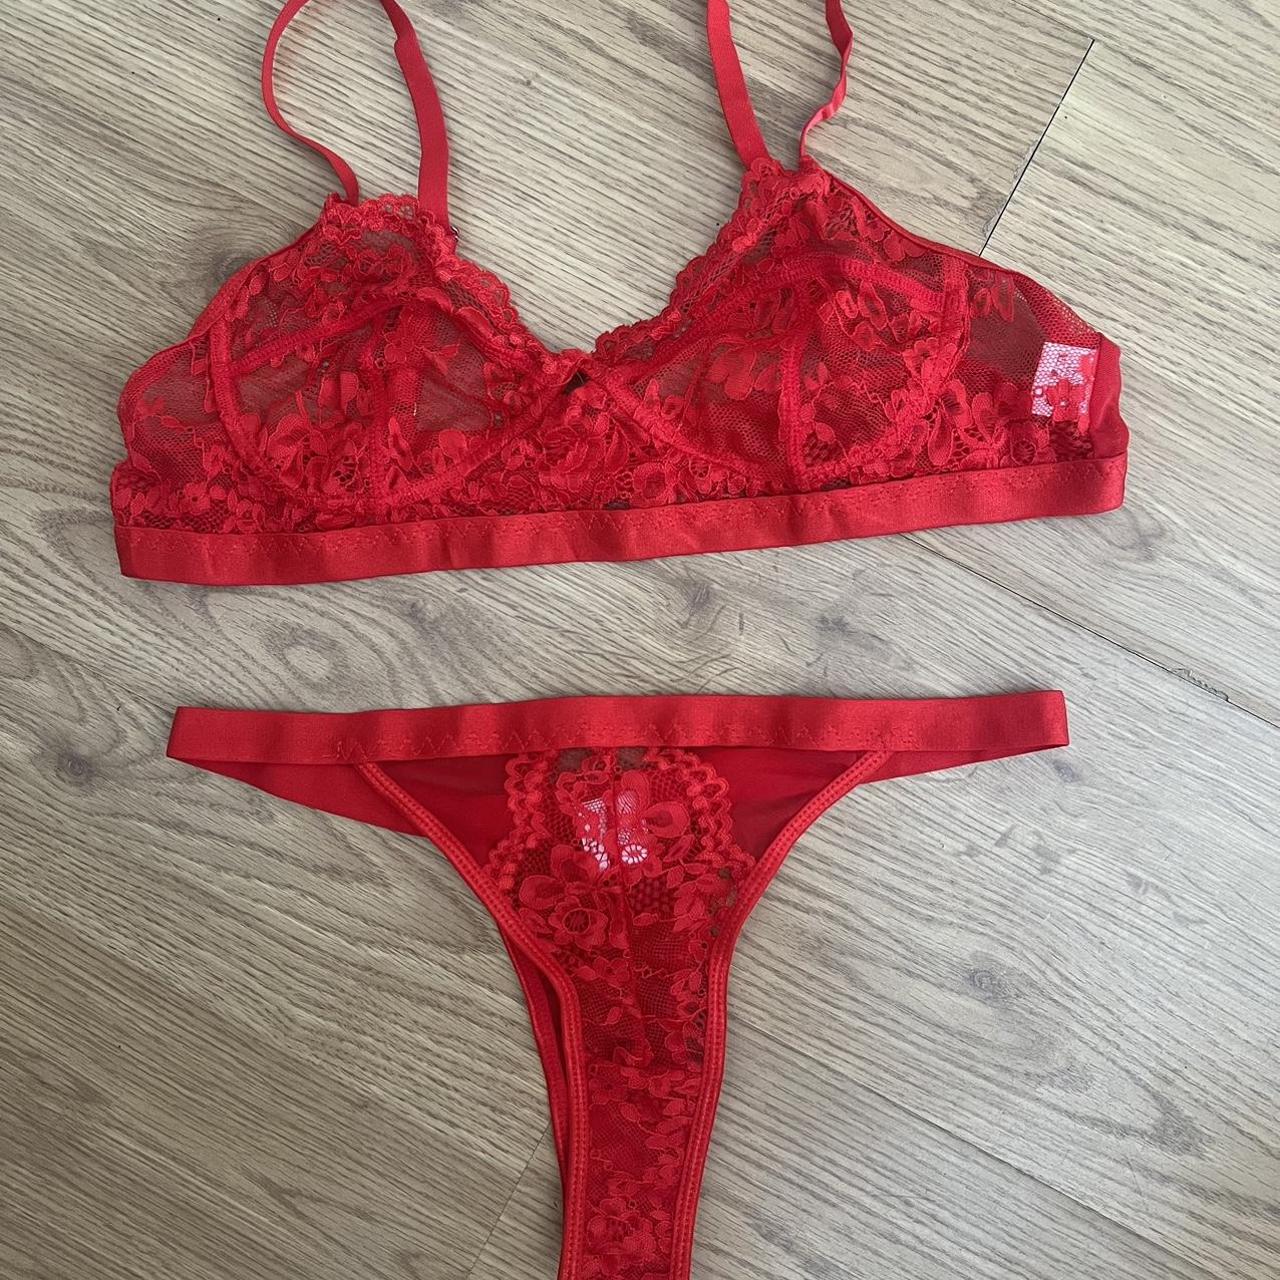 MESSAGE BEFORE BUYING Red lace lingerie set in size L - Depop